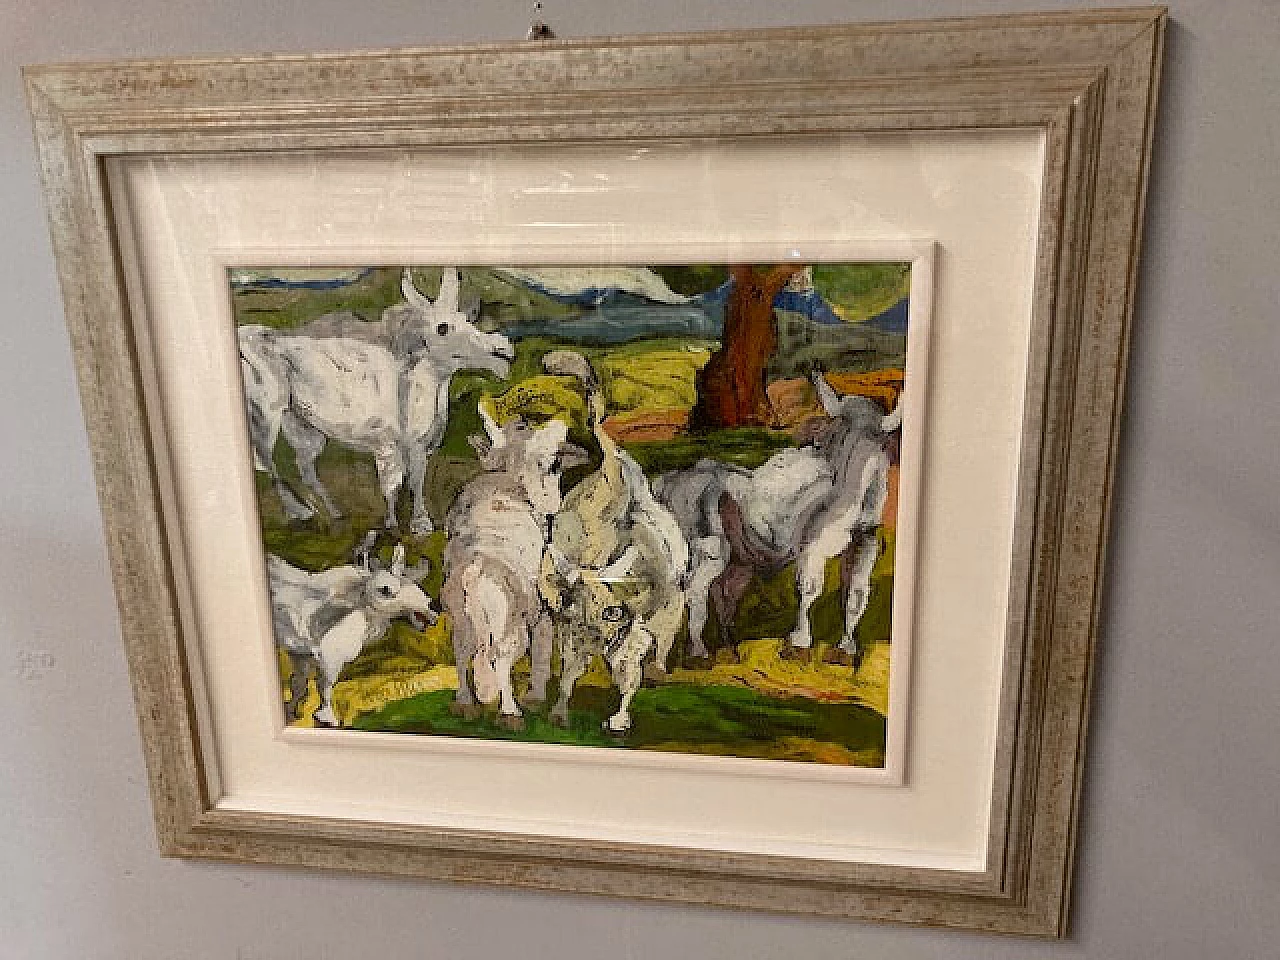 Giuseppe Serafini, Cows and horses in the pasture, oil on hardboard, 2000s 1